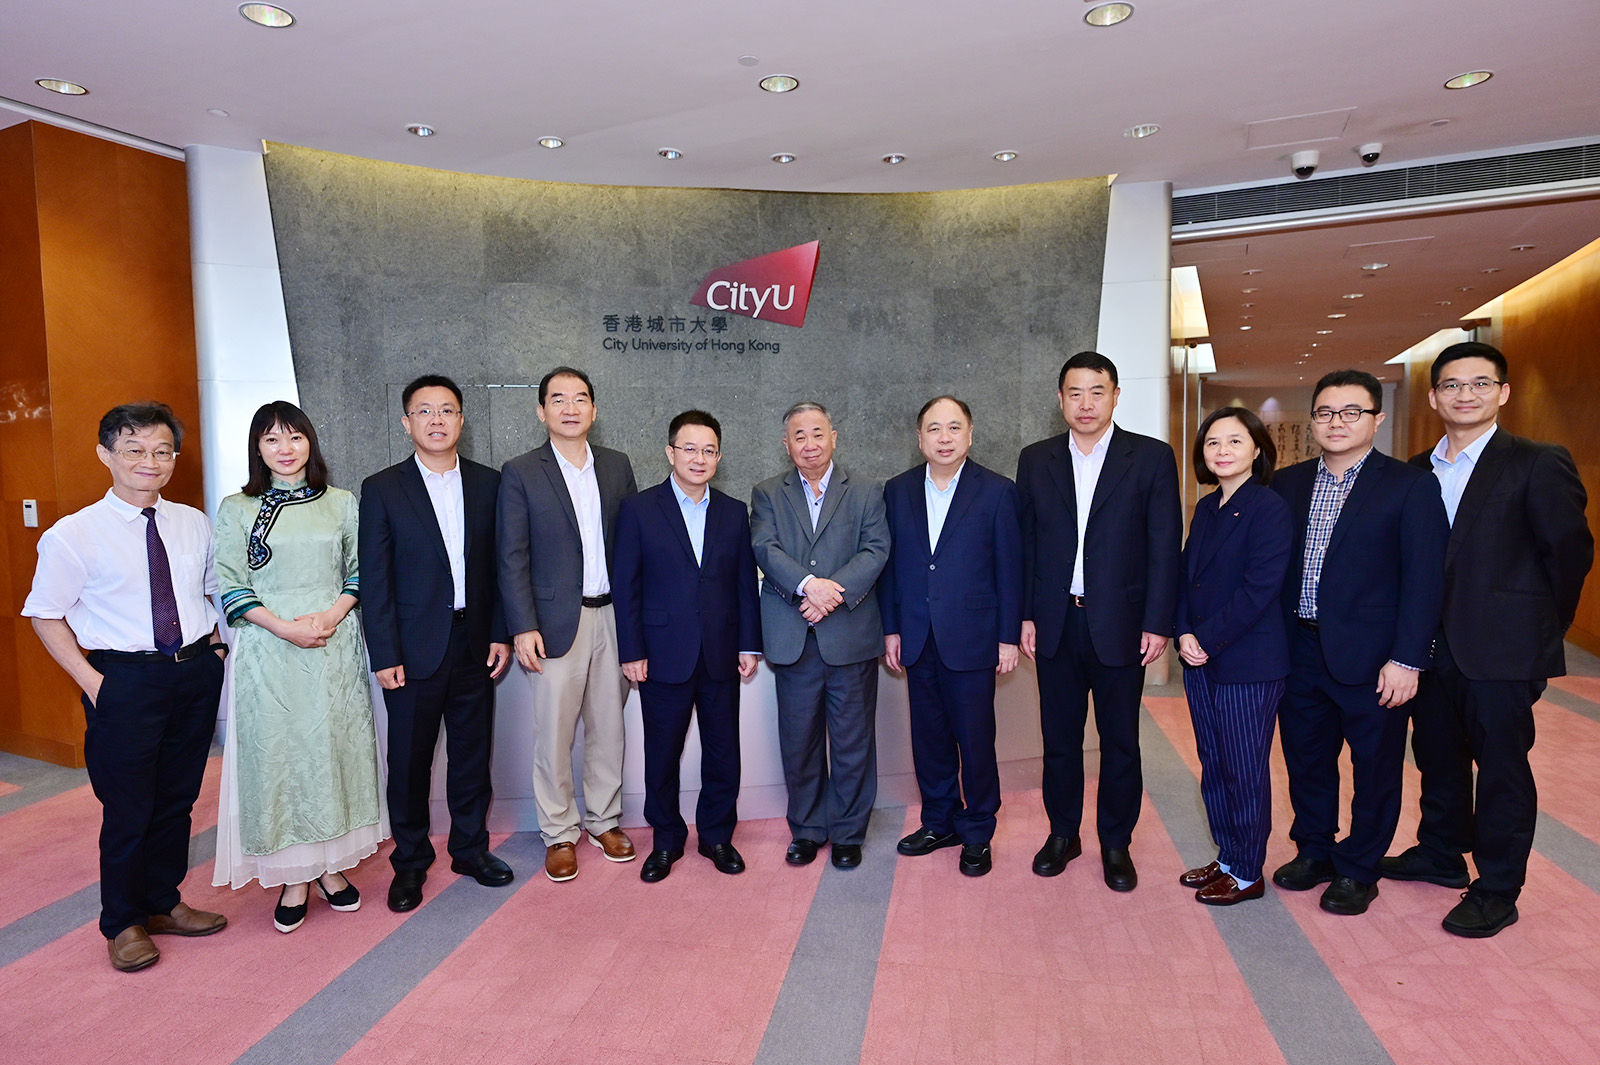 CityU senior management, including Professor Freddy Boey (middle), President, receive the delegation led by Mr Liu Wei (fifth from left), Deputy Secretary of the Dongguan Municipal Party Committee and Secretary of the Songshan Lake Party Working Committee.